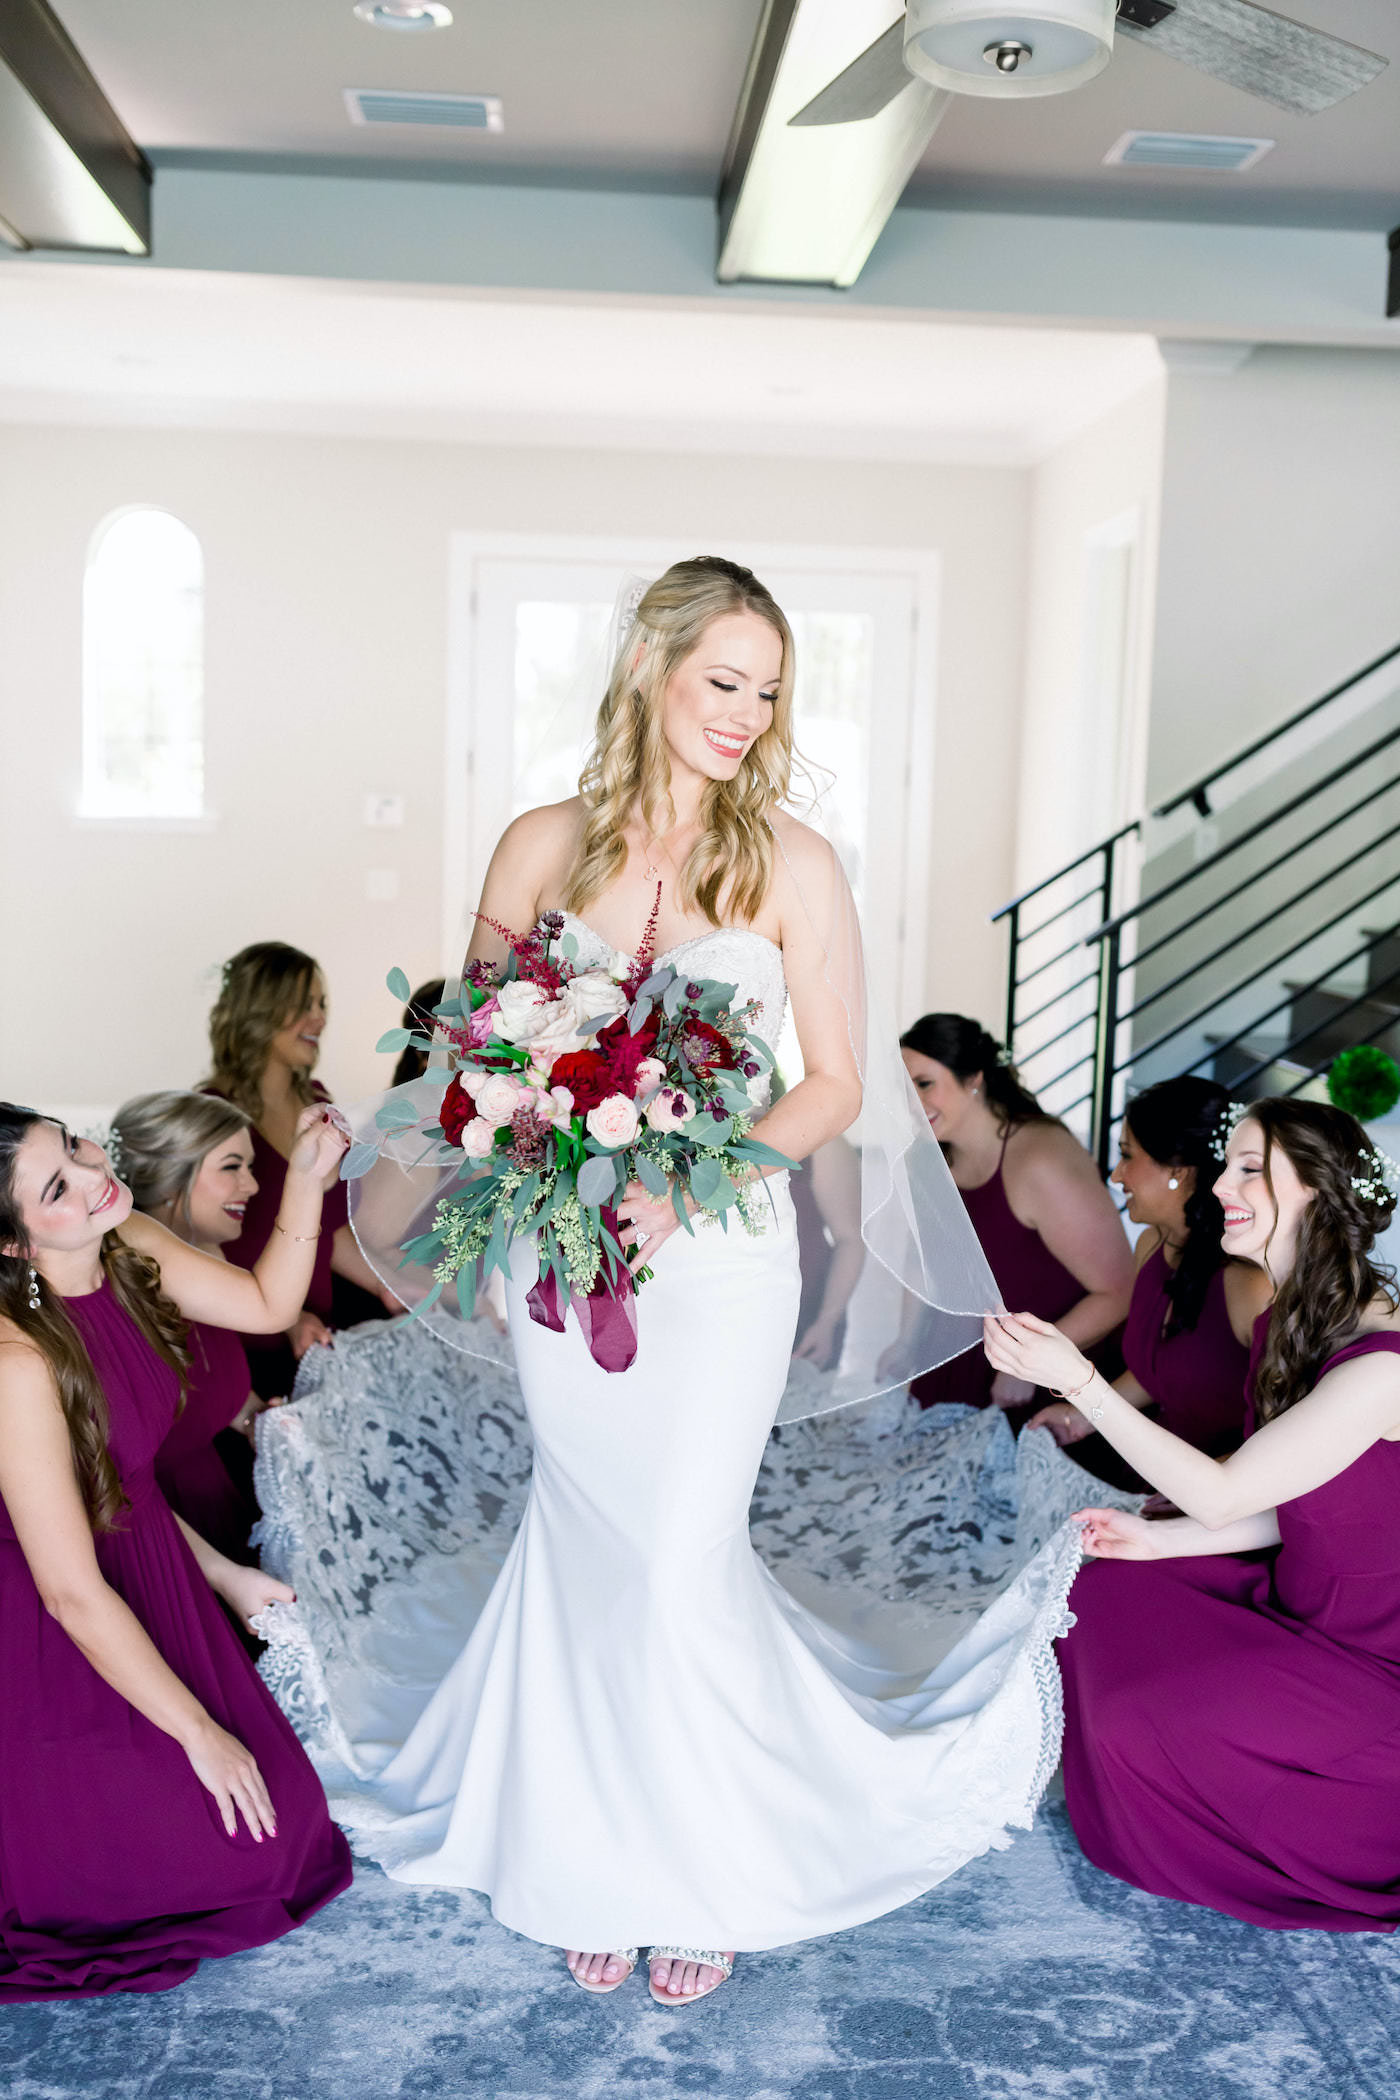 Bridesmaids Helping Bride Get Ready Shot | Burgundy and Blush Pink Bridal Bouquet with Roses and Astilbe and Eucalyptus Greenery | Shauna and Jordon Photography